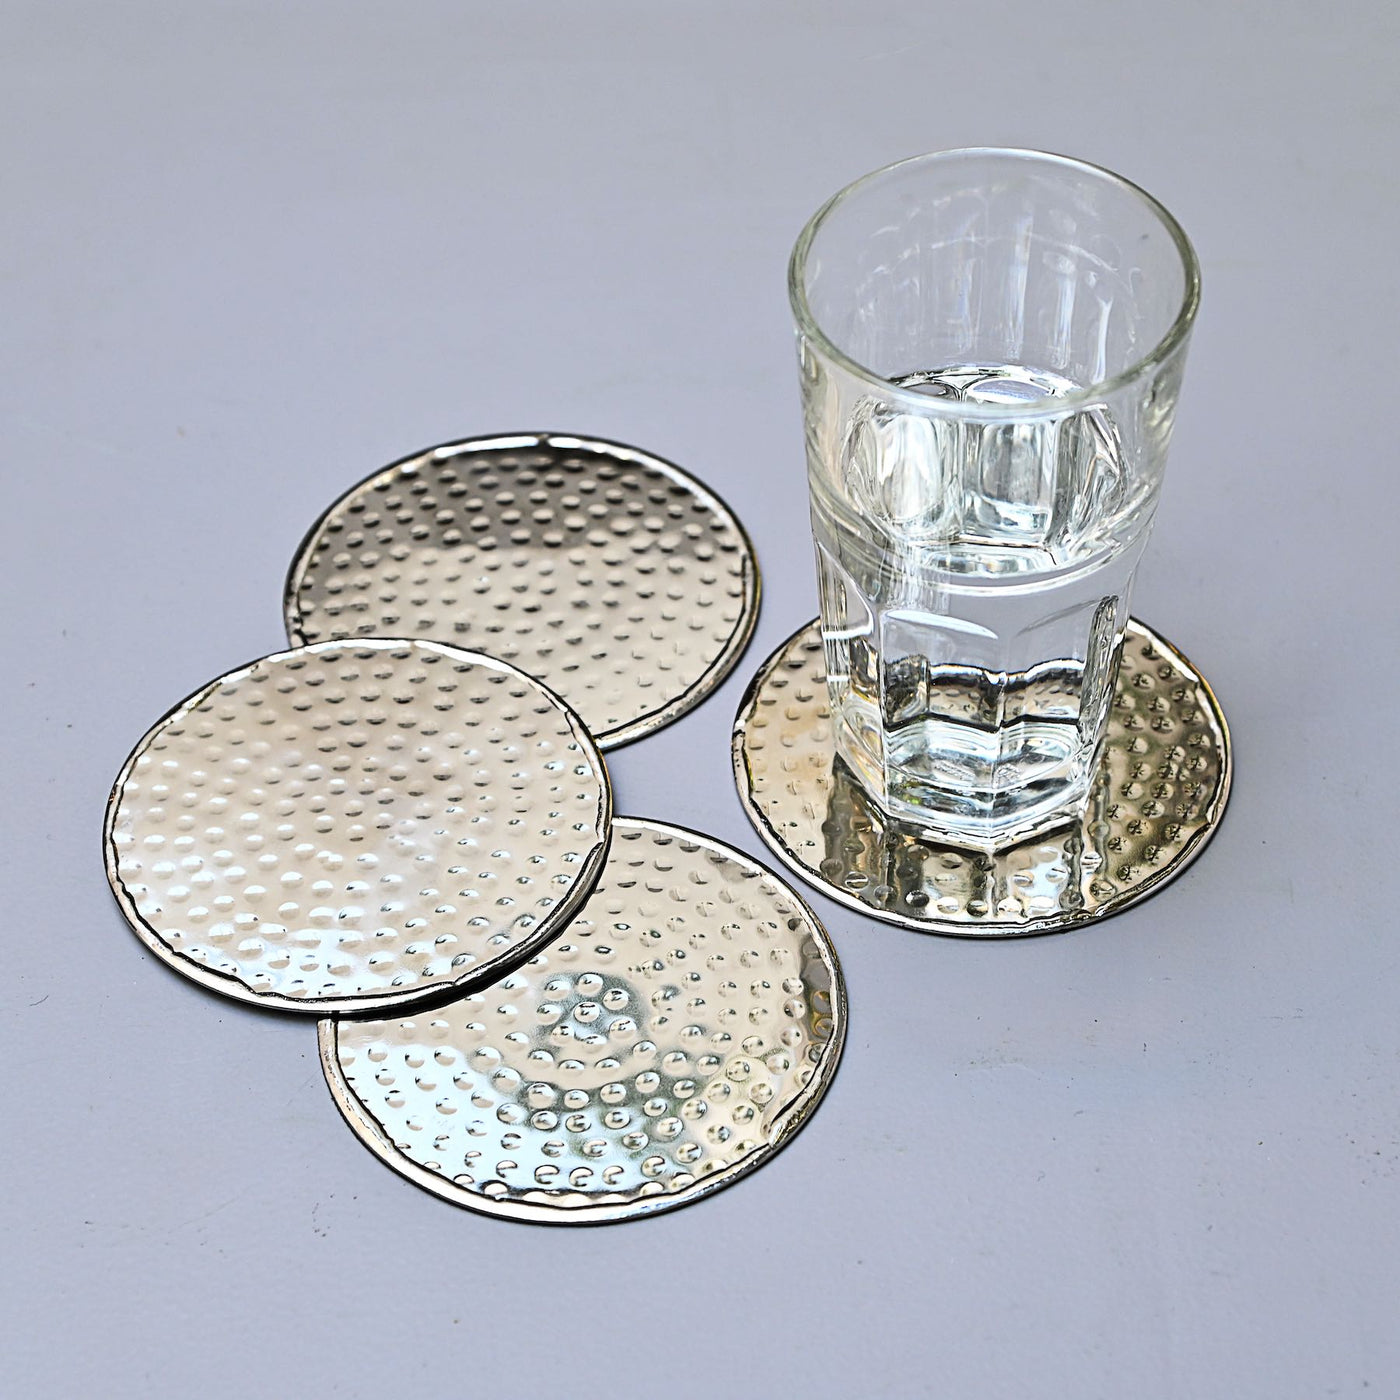 Hammered Silver Coasters - Set of 4